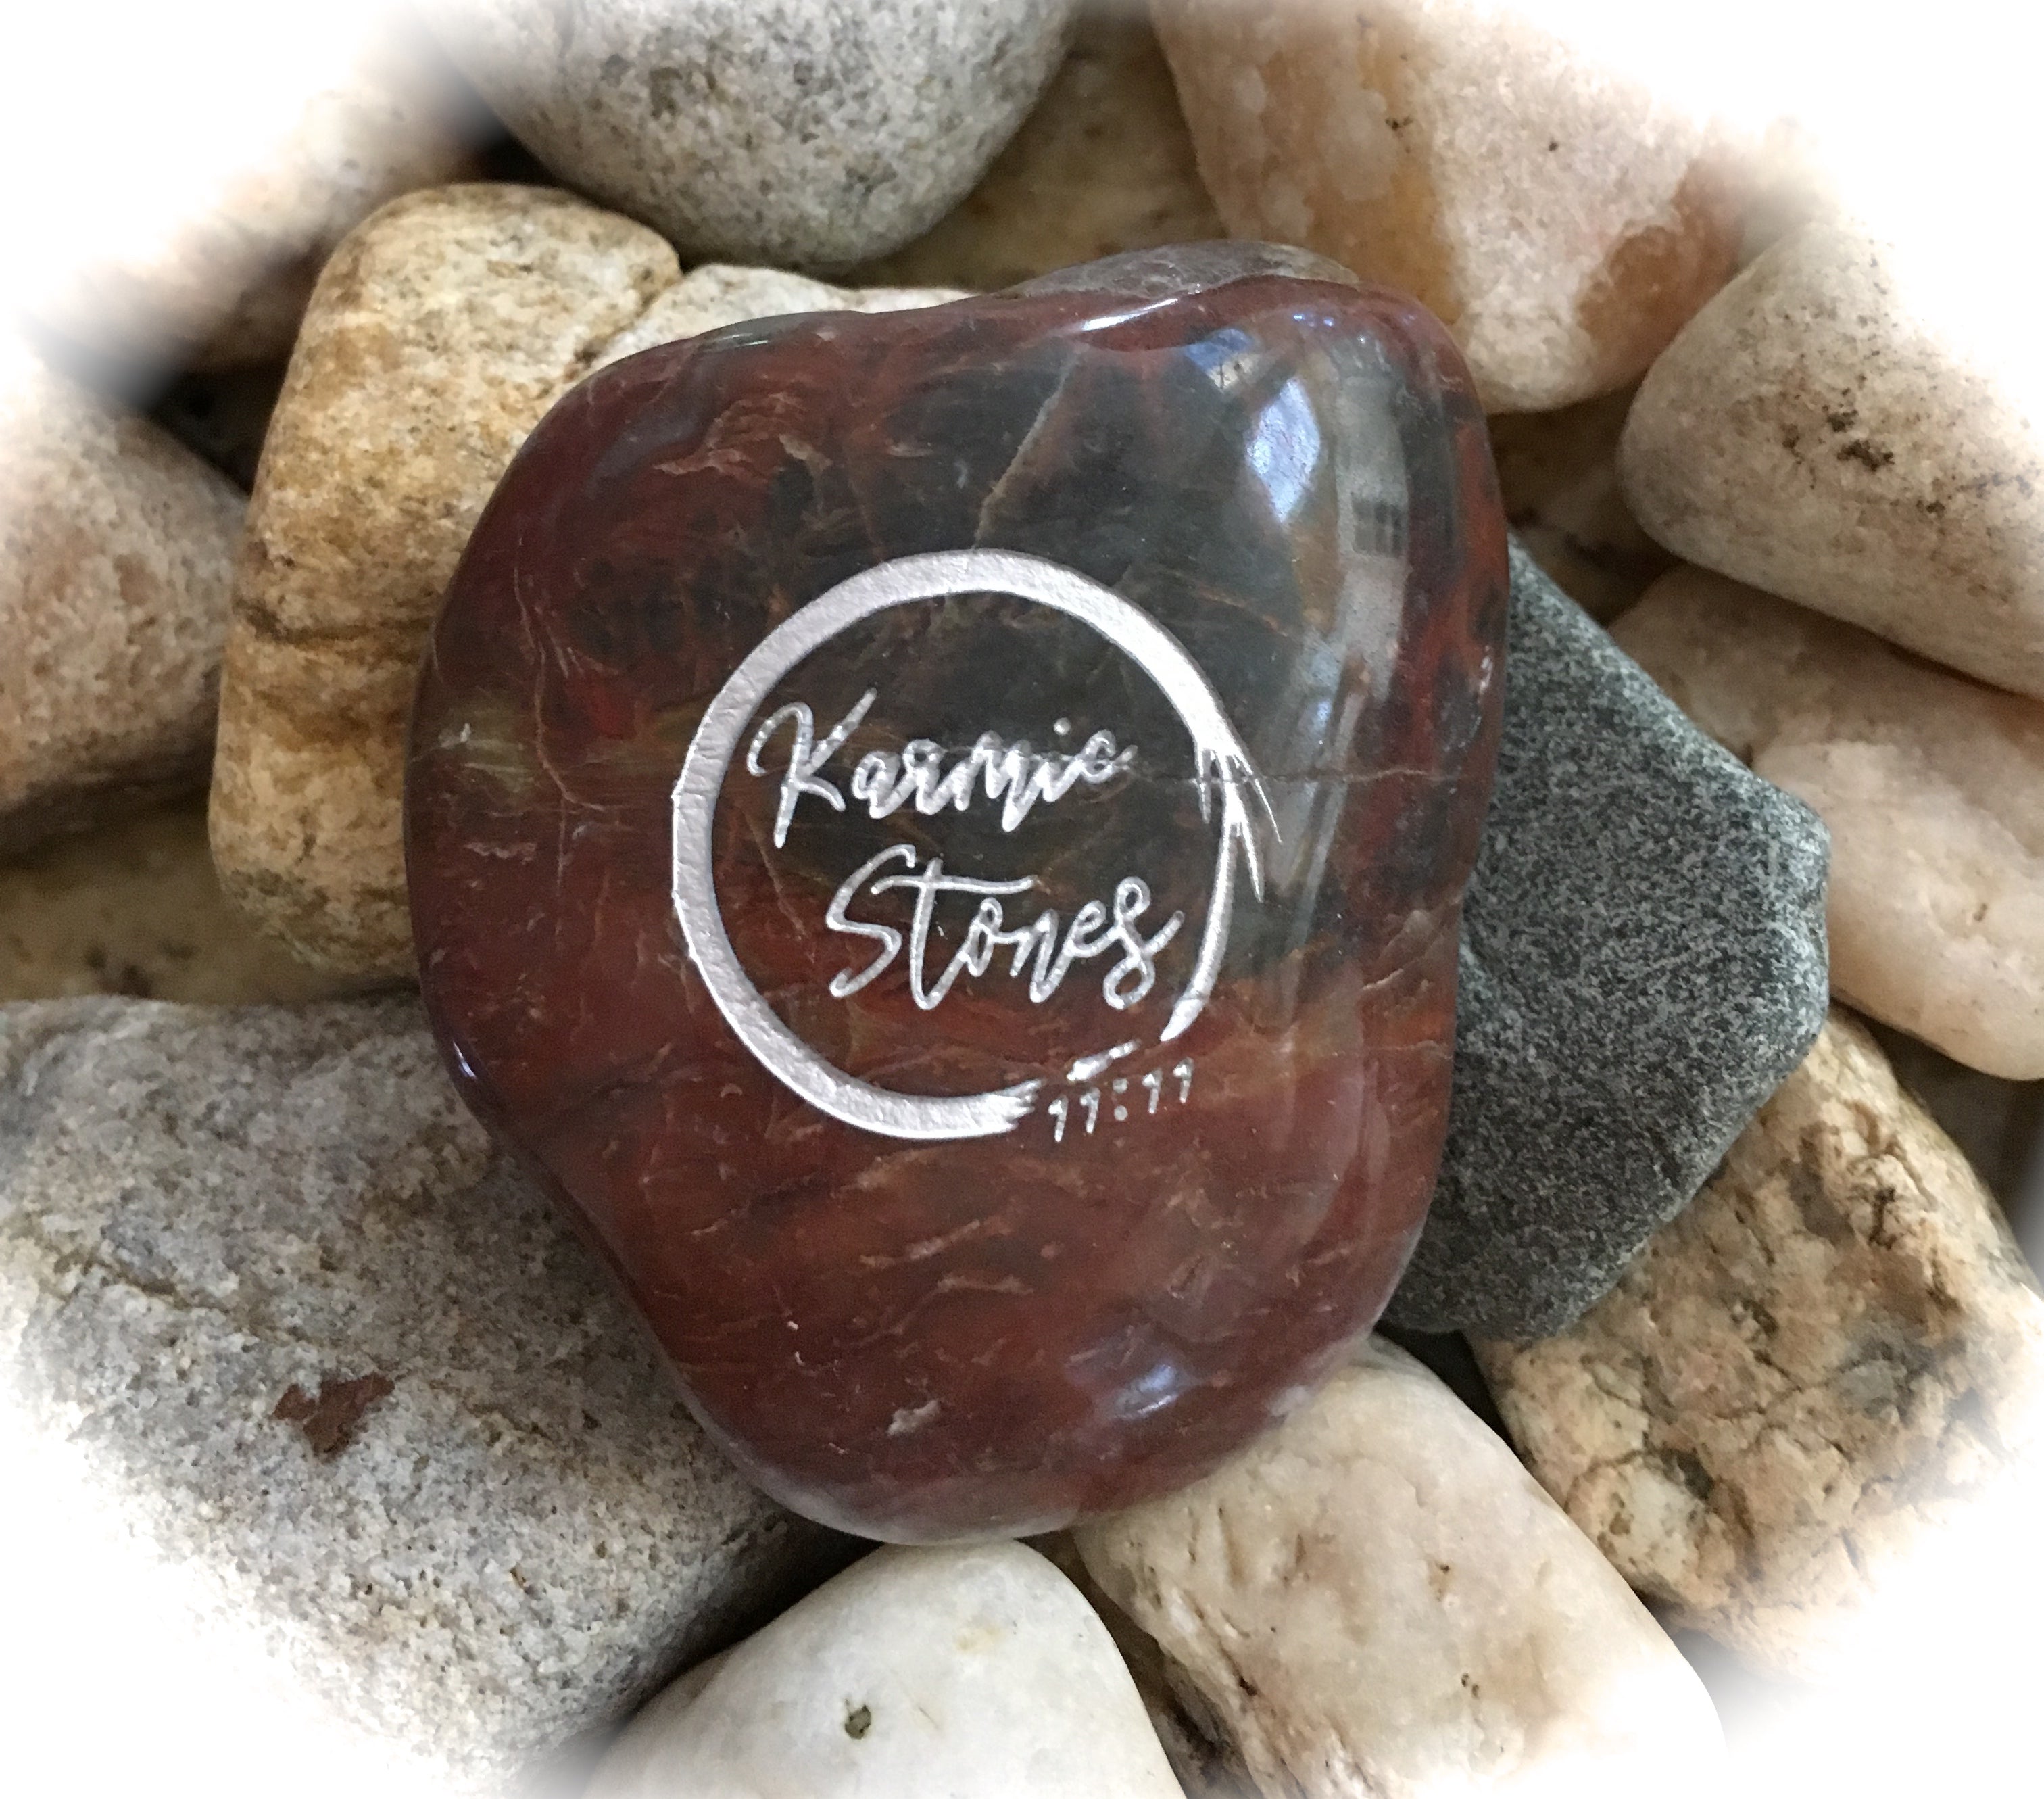 I Love You More ~ Engraved Inspirational Rock